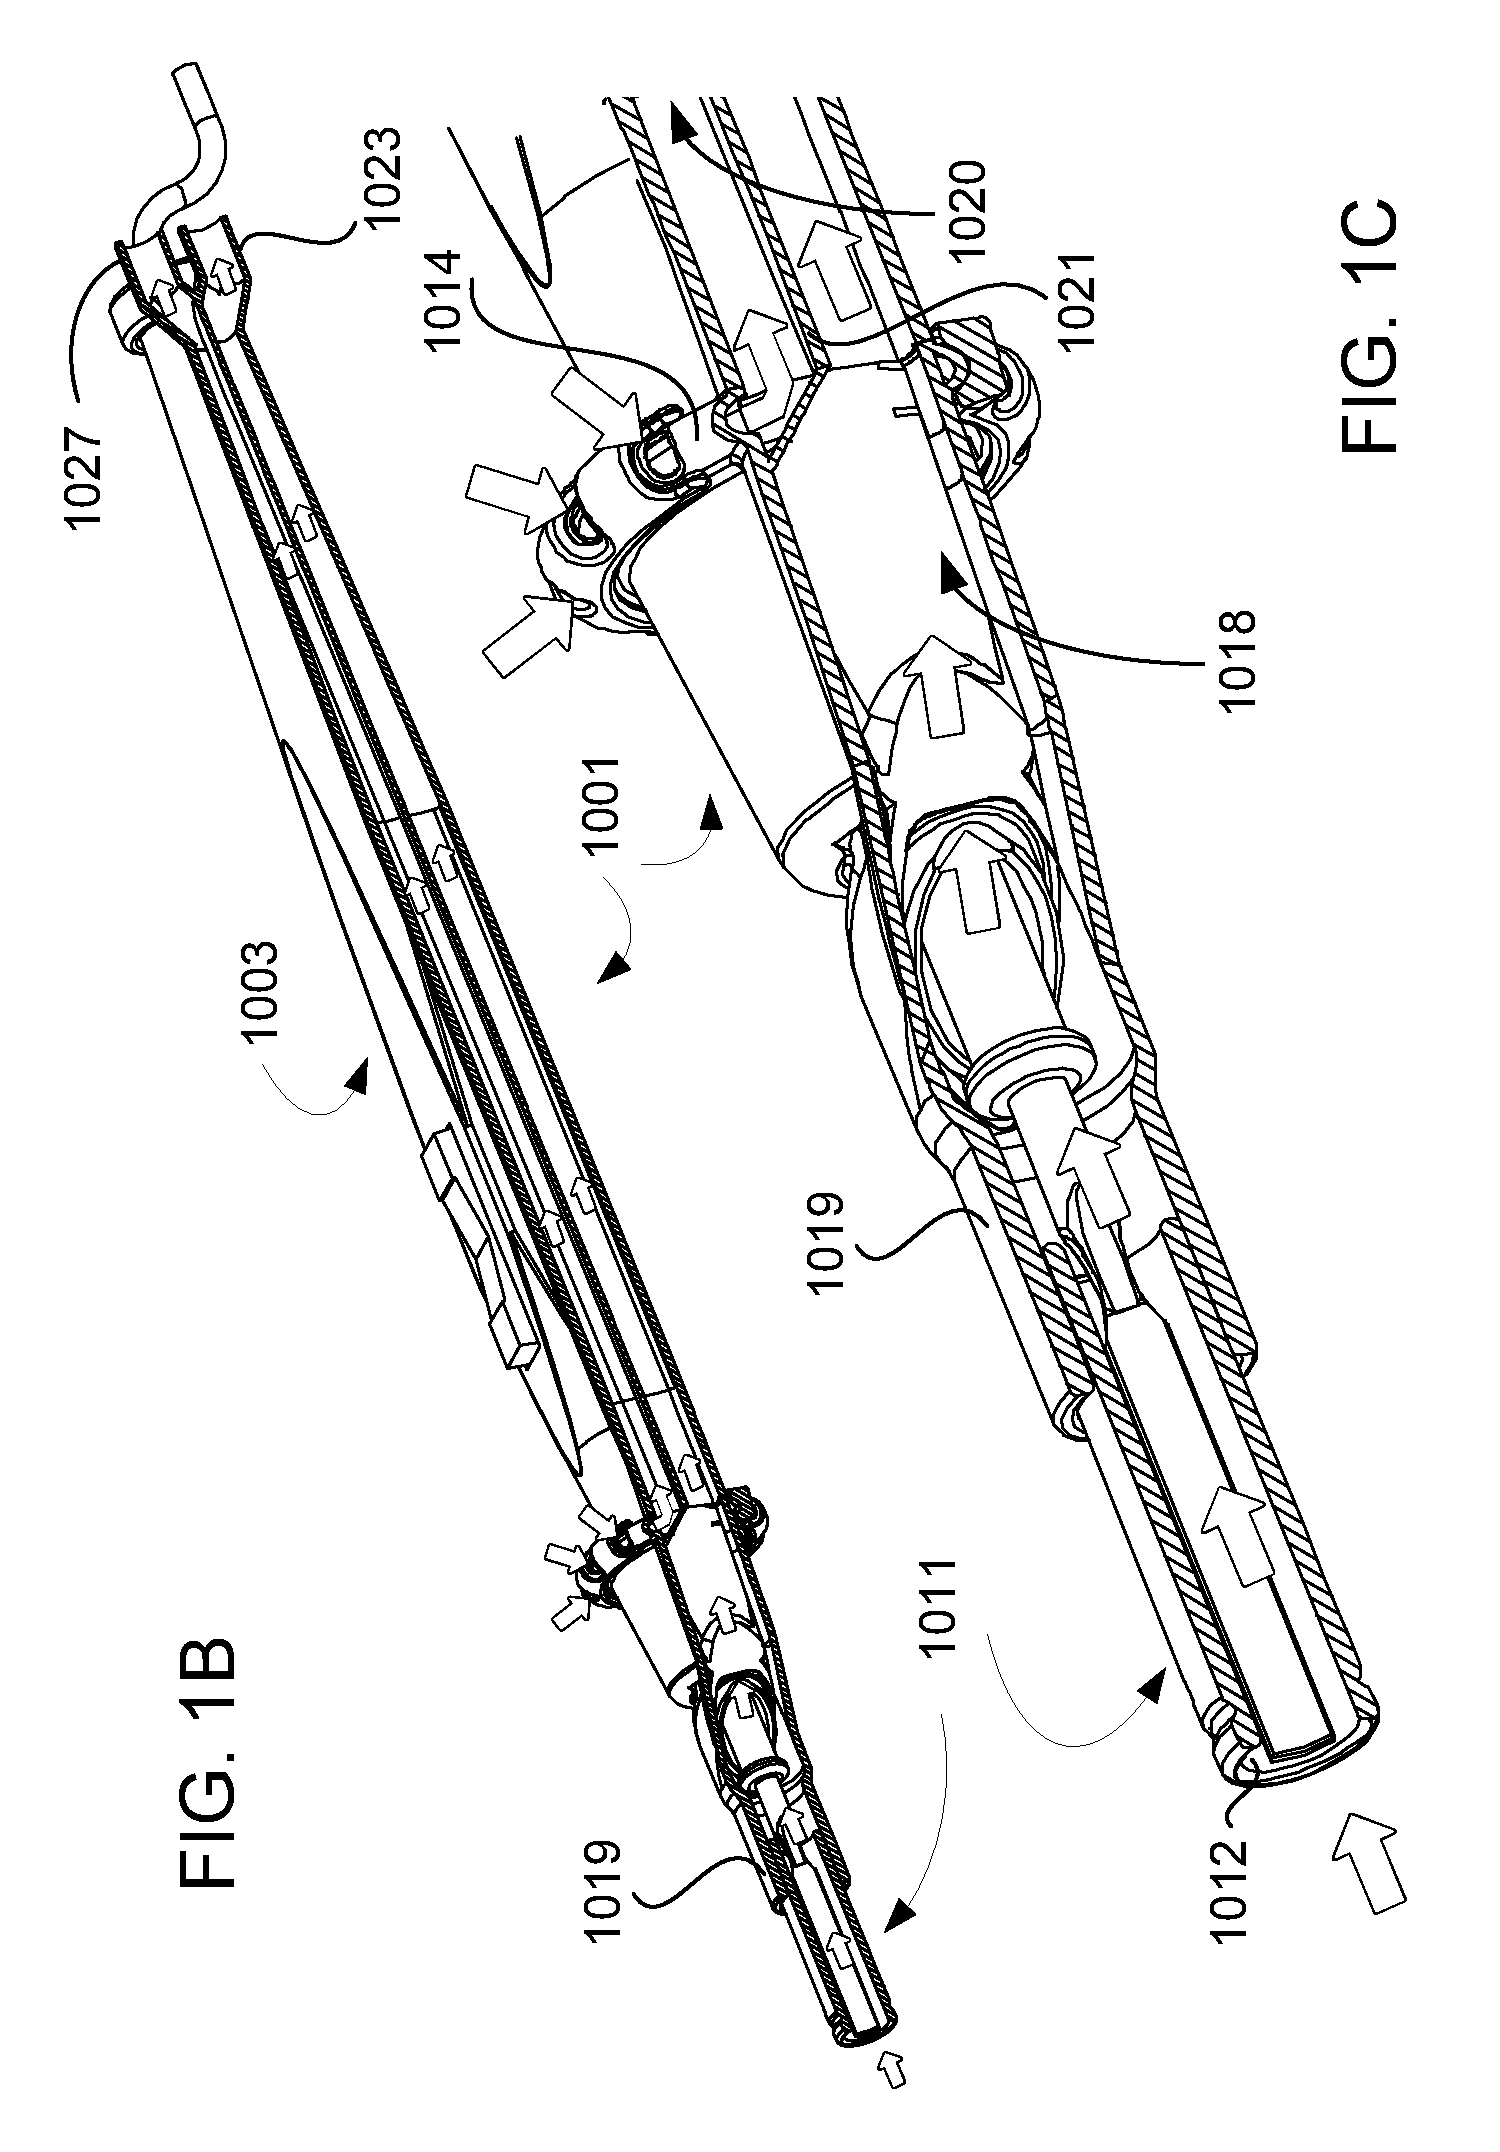 Apparatus and method for electrosurgical suction